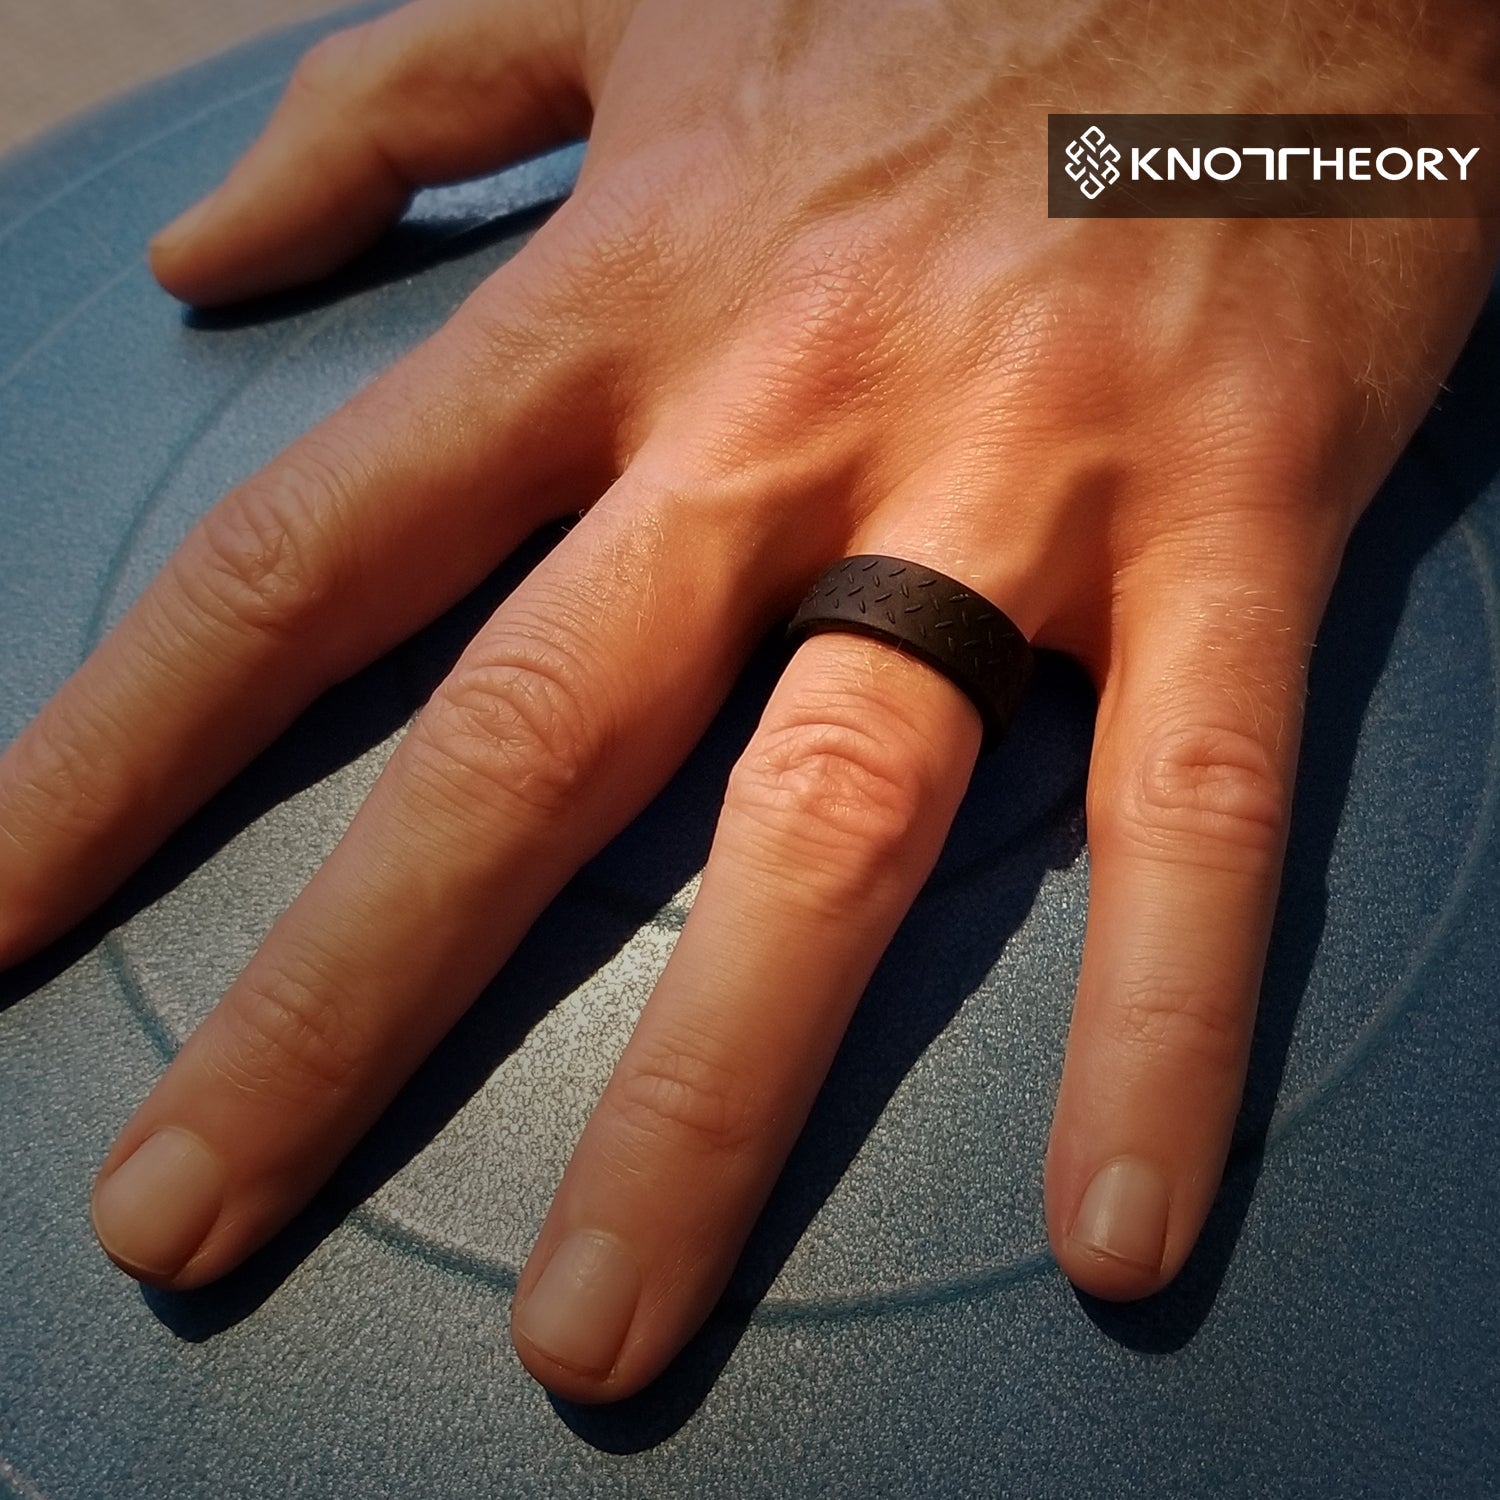 Checkerplate Black Silicone Ring For Men - Knot Theory